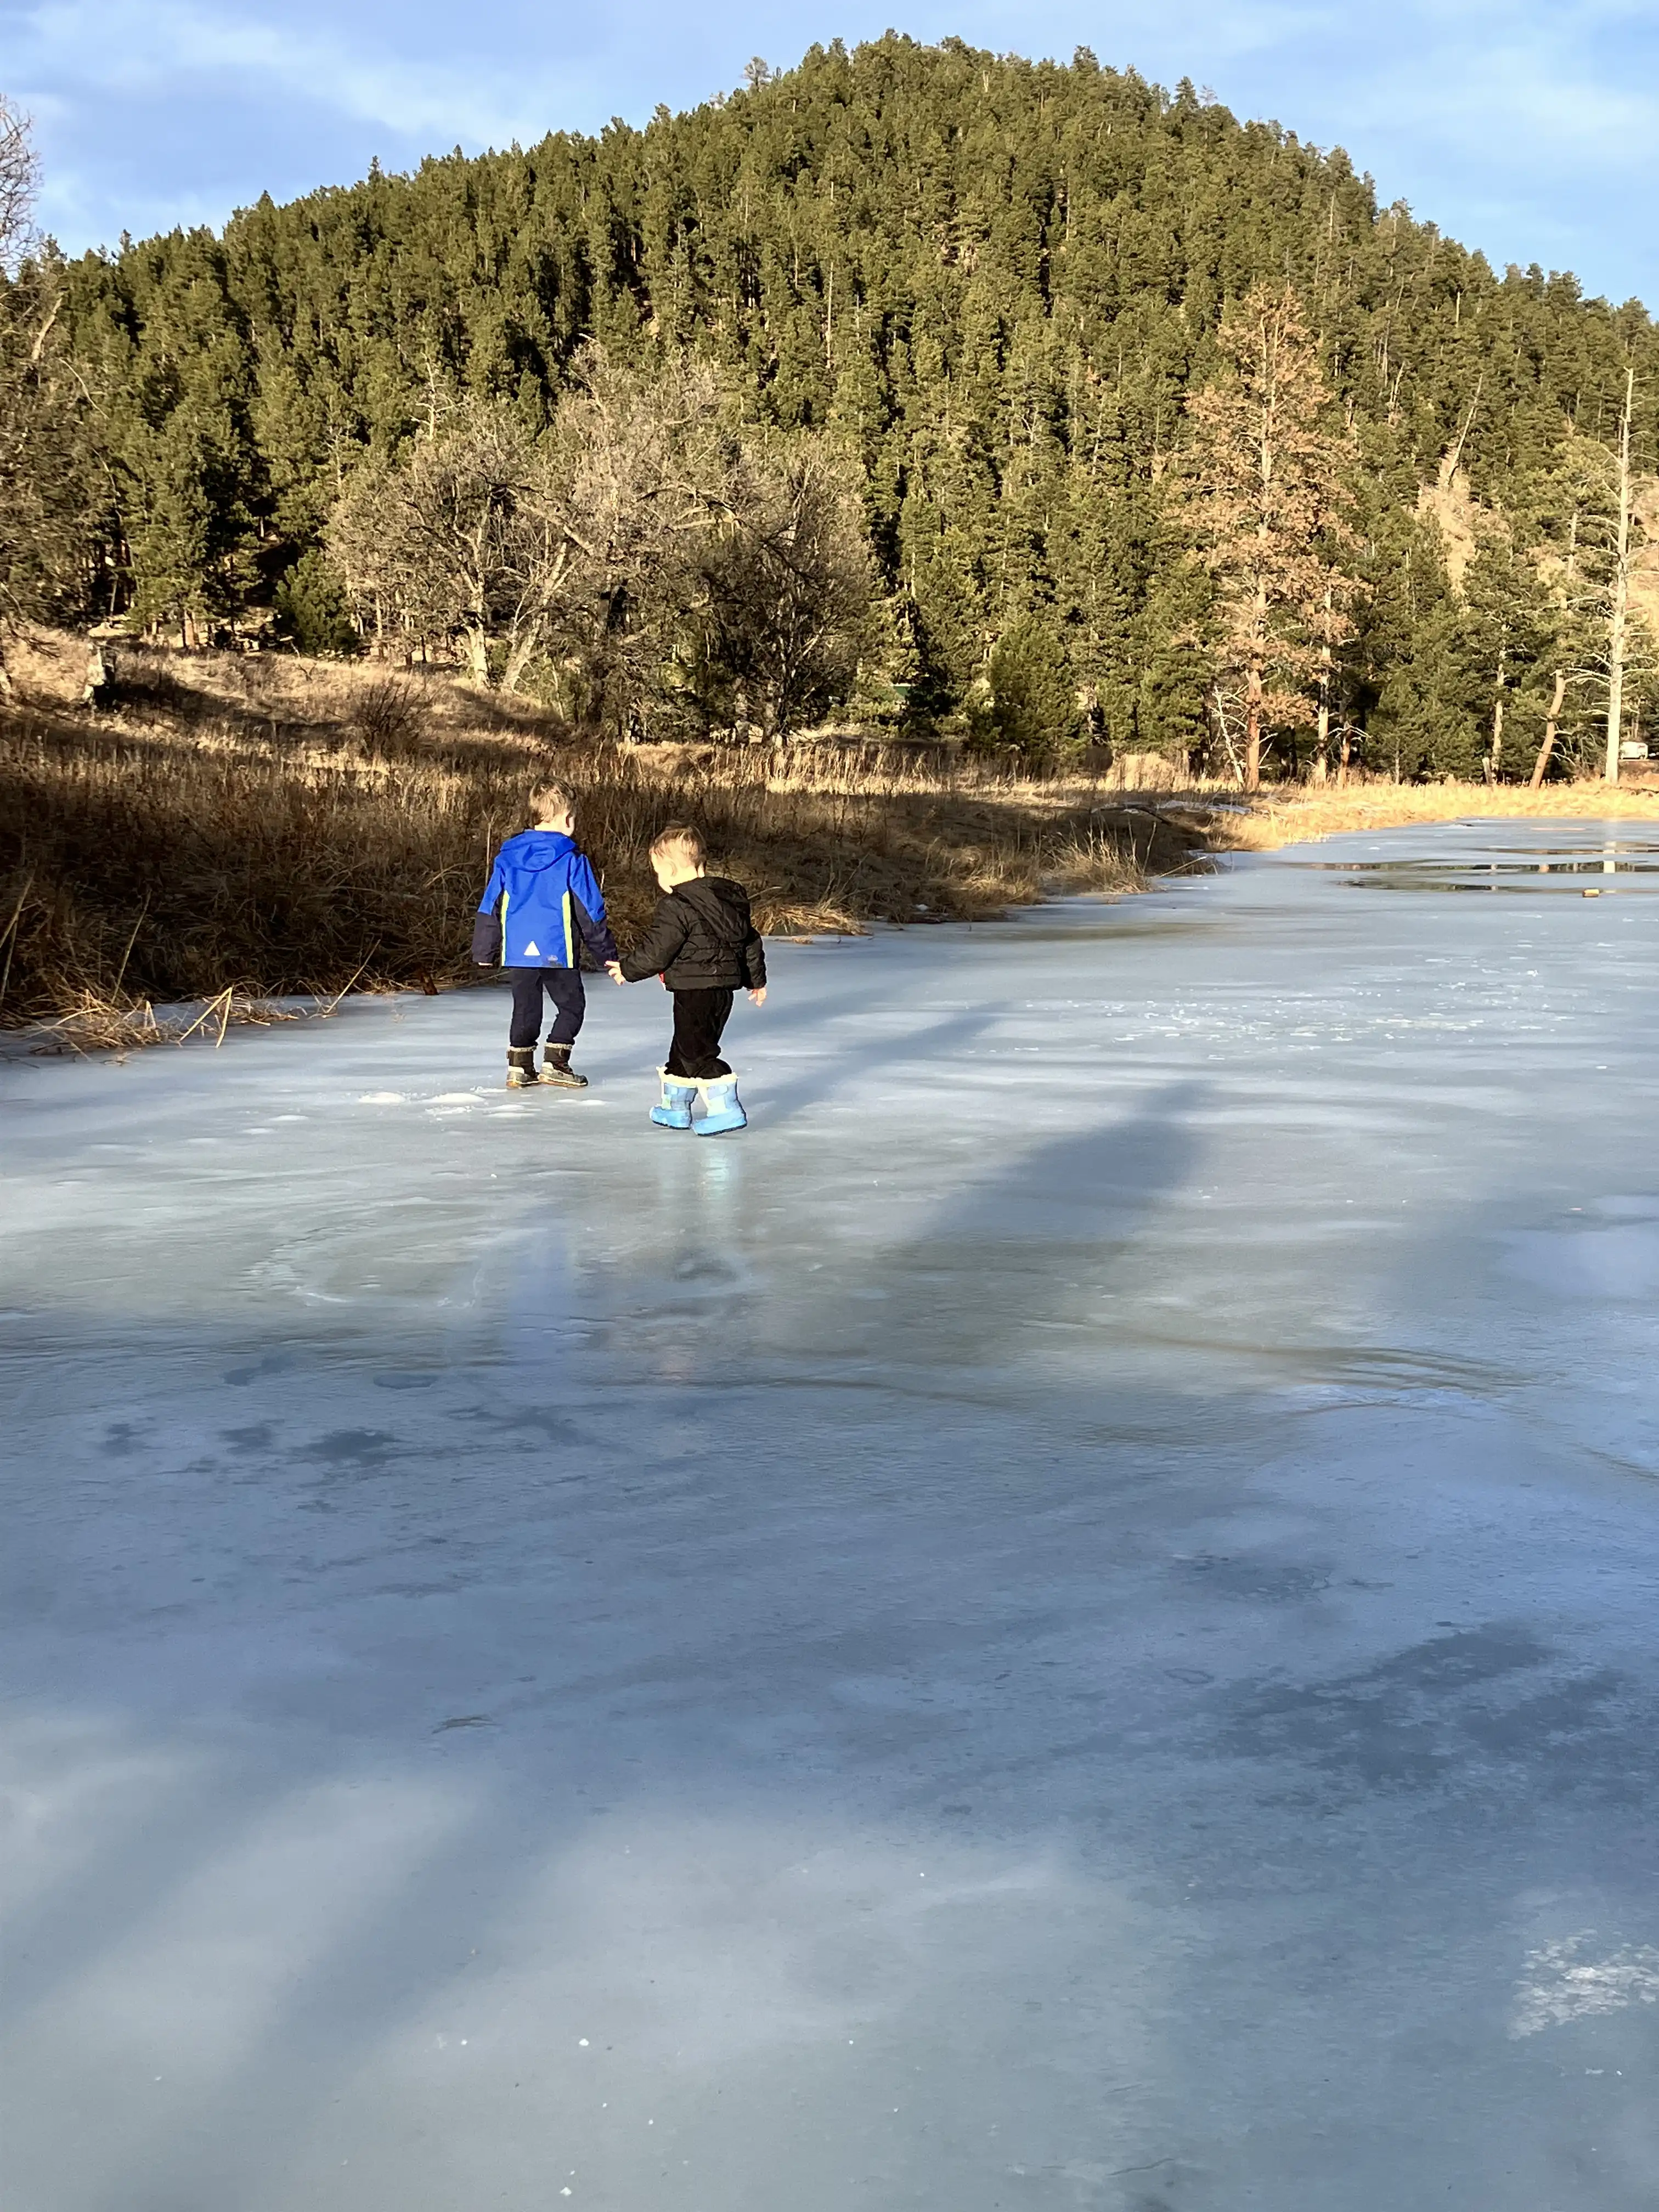 Graham and Royal standing on a frozen river together.